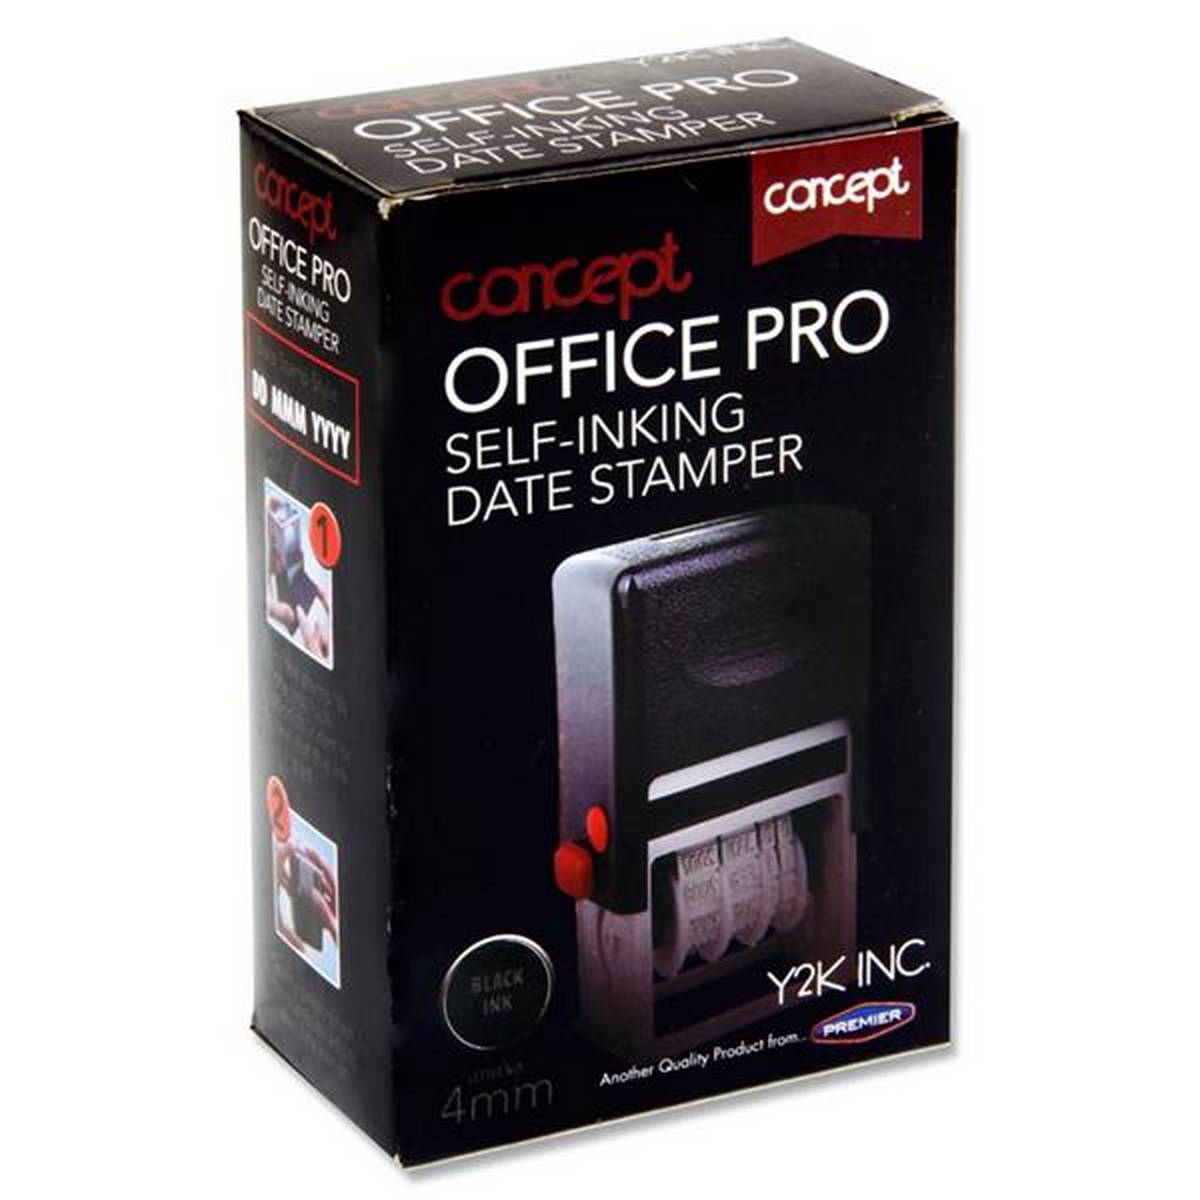 Concept Office Pro Self-inking Date Stamper